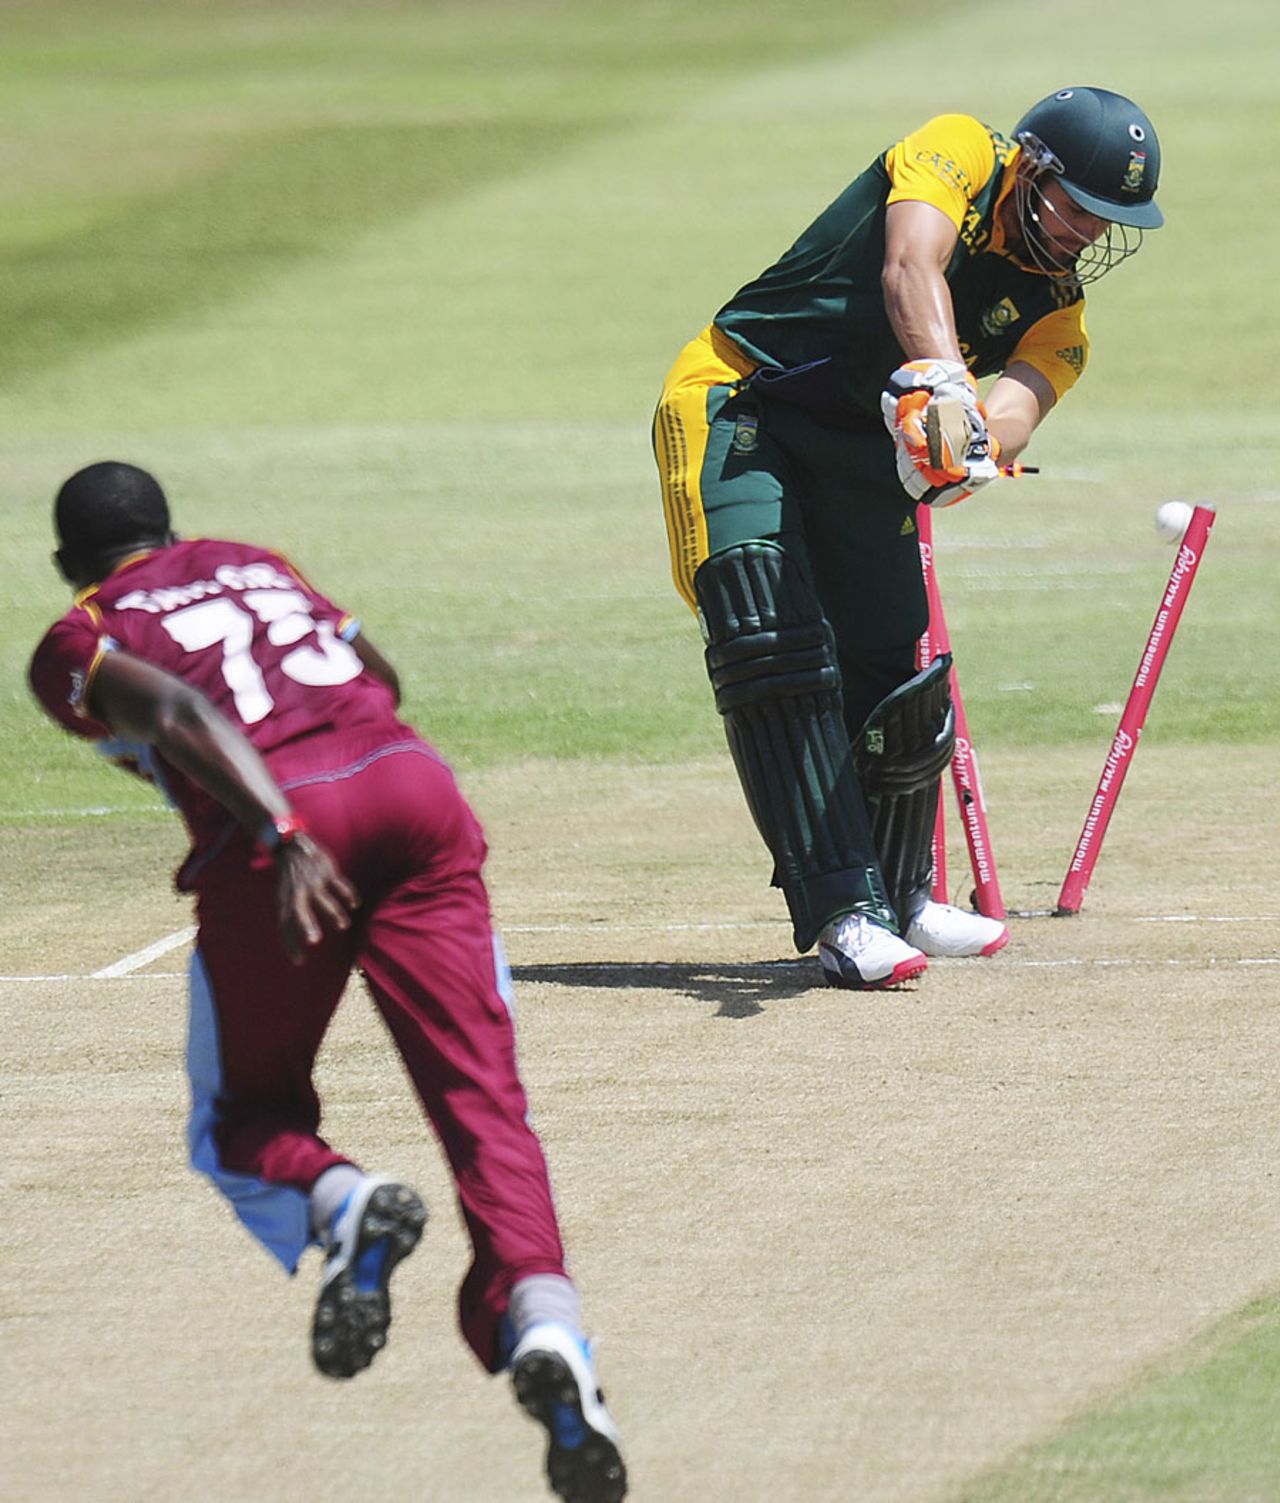 Rilee Rossouw was cleaned up by Jerome Taylor, South Africa v West Indies, 1st ODI, Durban, January 16, 2015